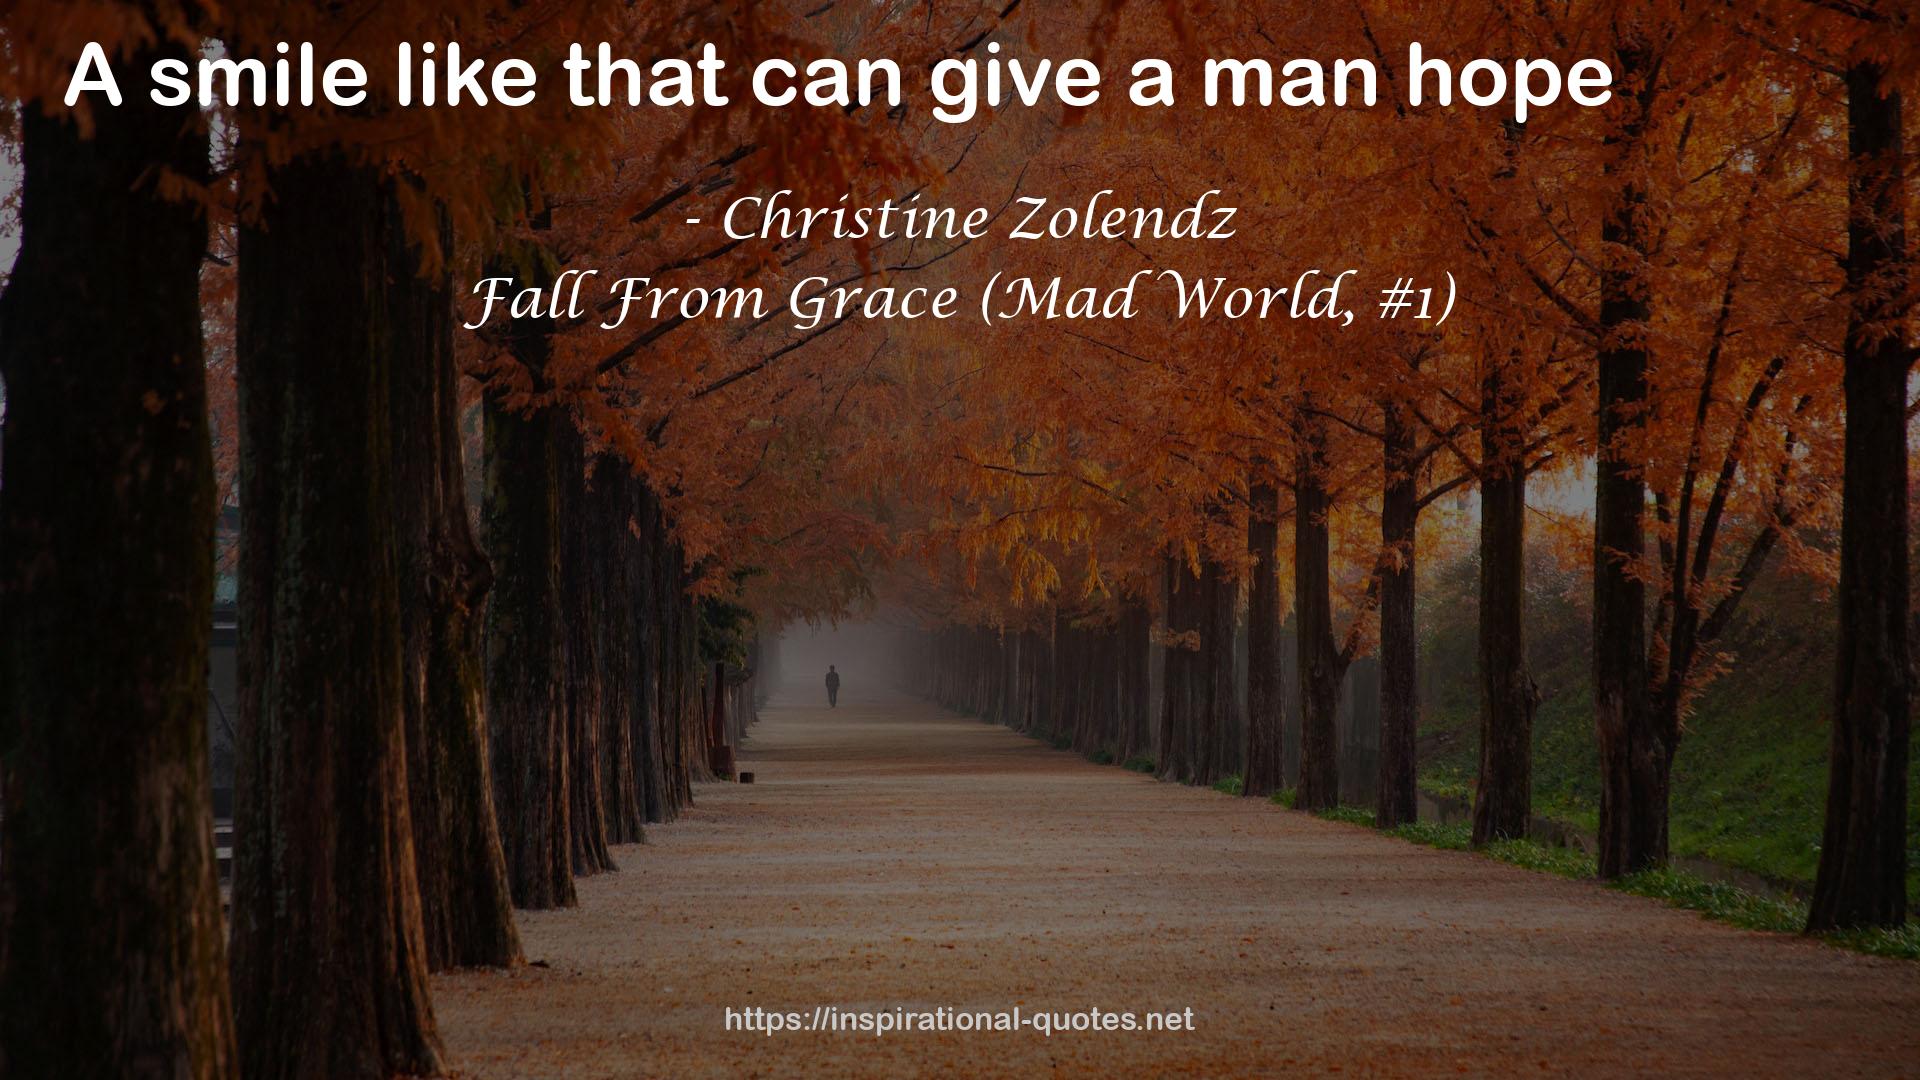 Fall From Grace (Mad World, #1) QUOTES